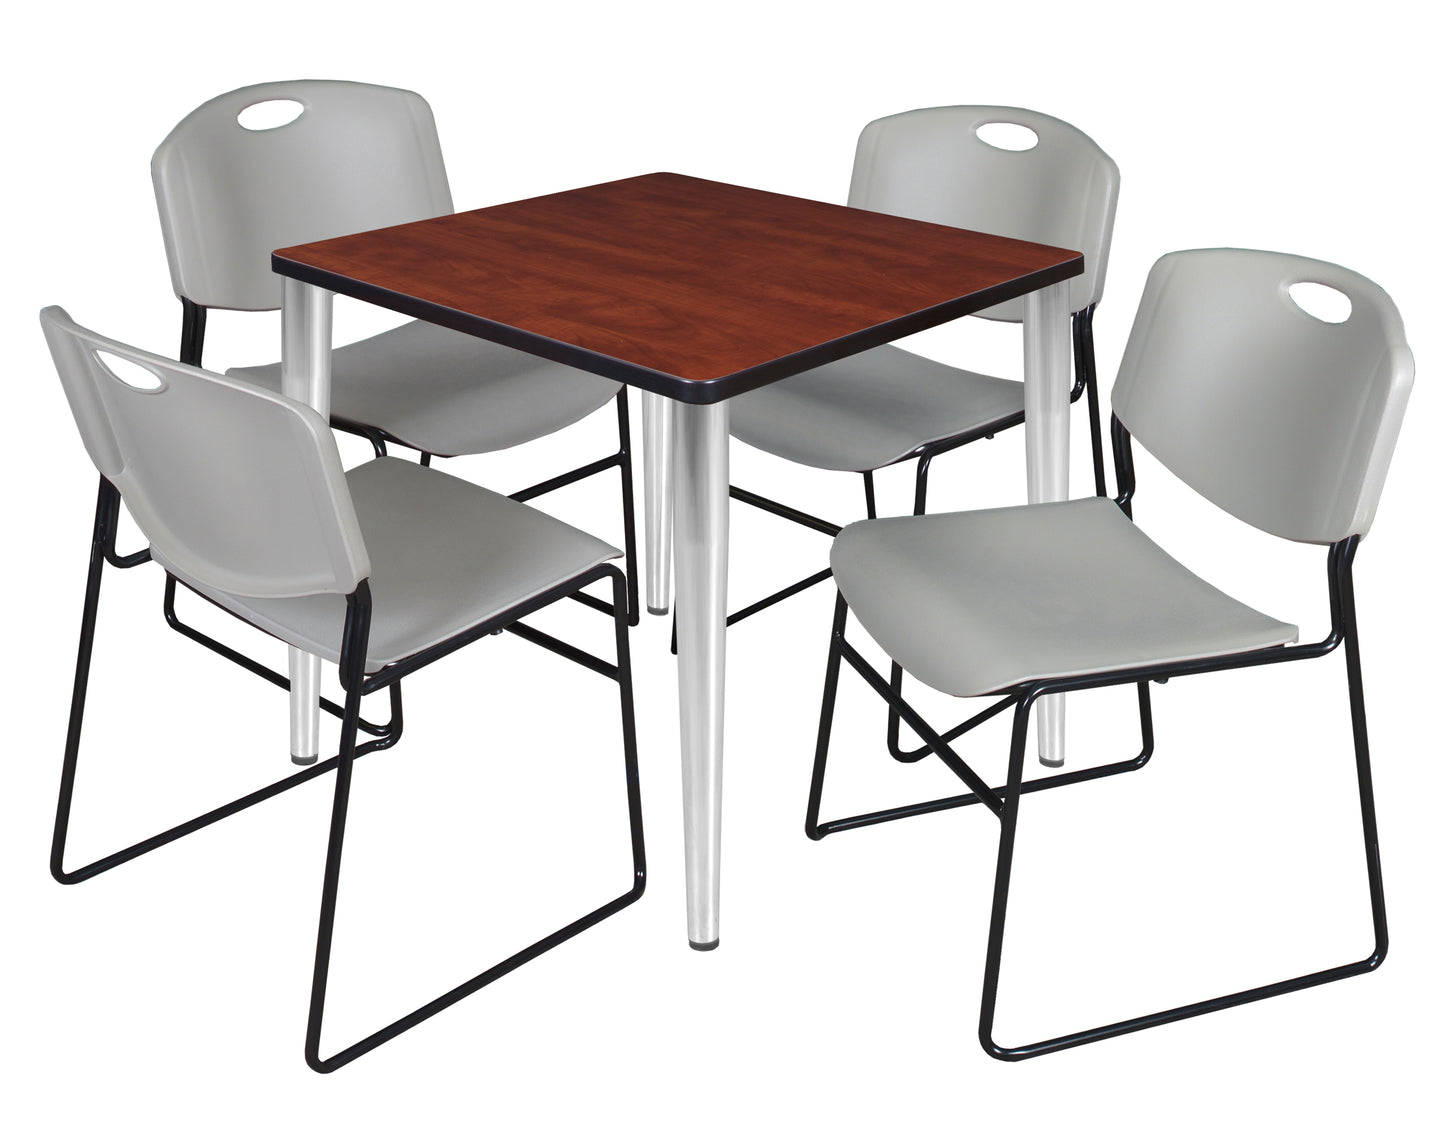 Regency Kahlo 30 in. Square Breakroom Table & 4 Zeng Stack Chairs